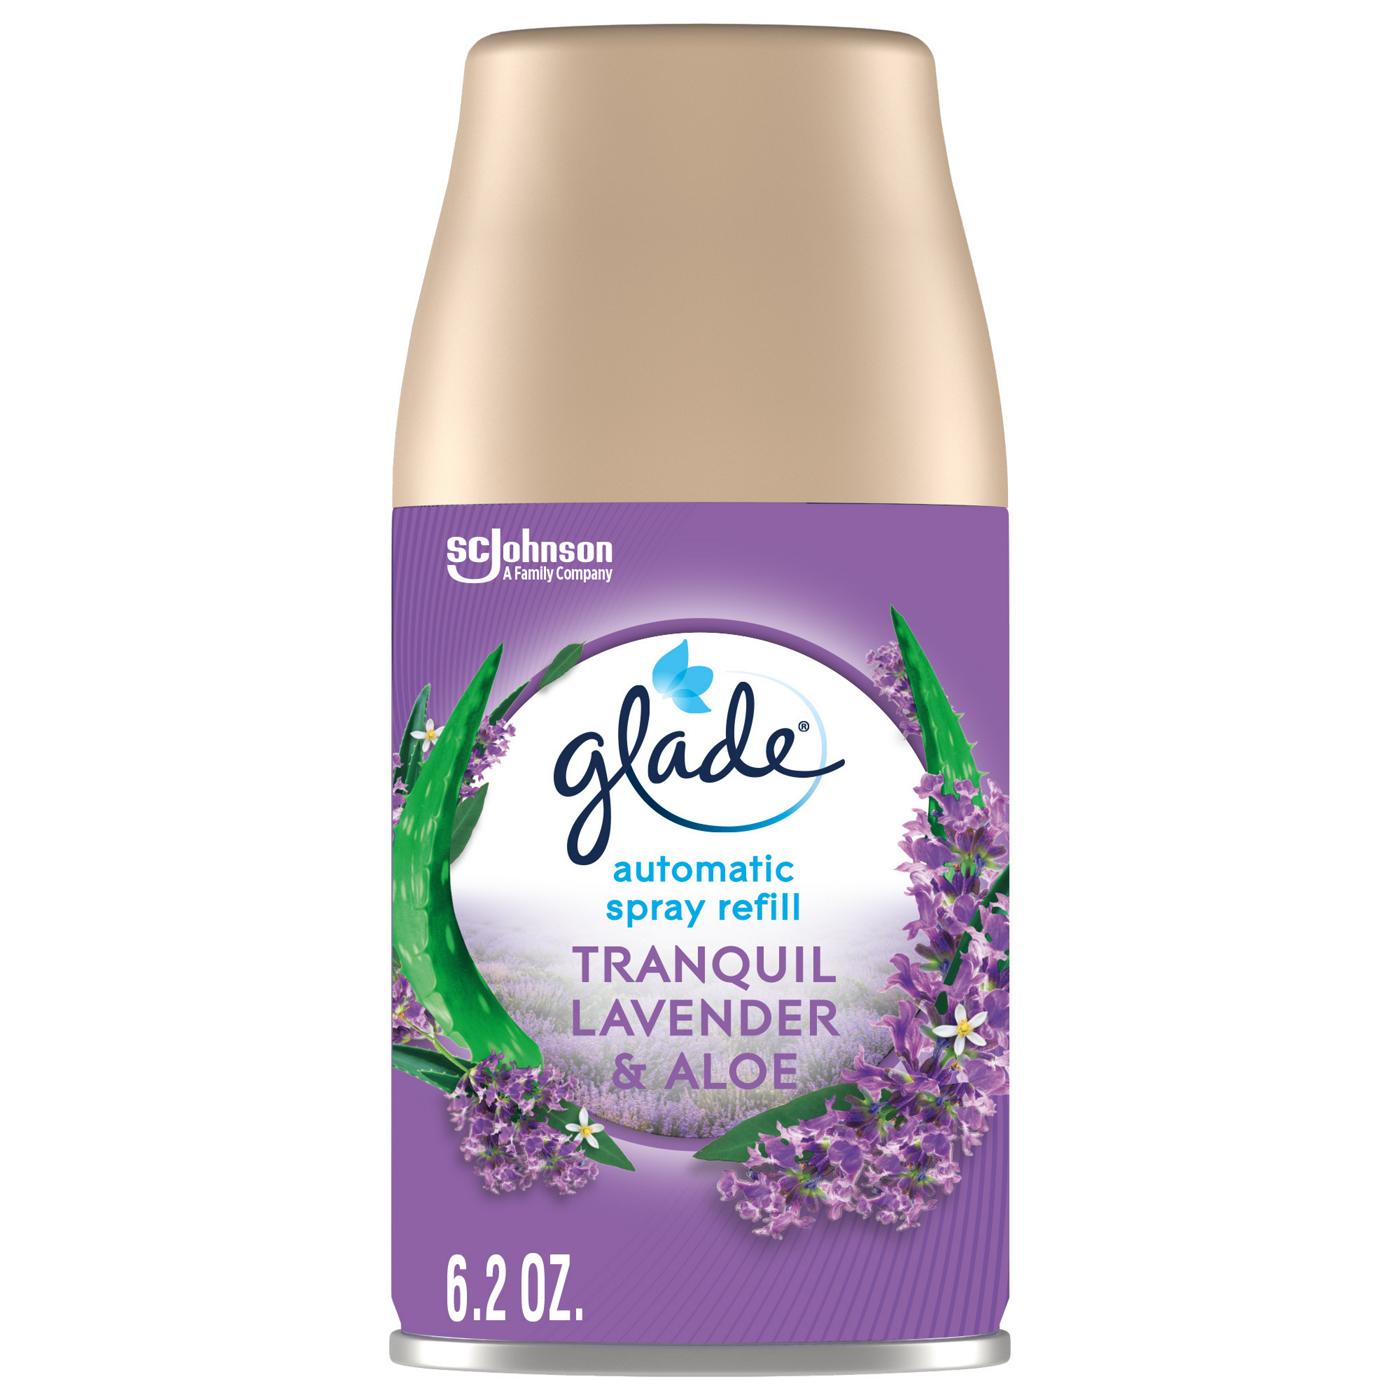 Glade Automatic Spray Refill - Tranquil Lavender & Aloe; image 1 of 2